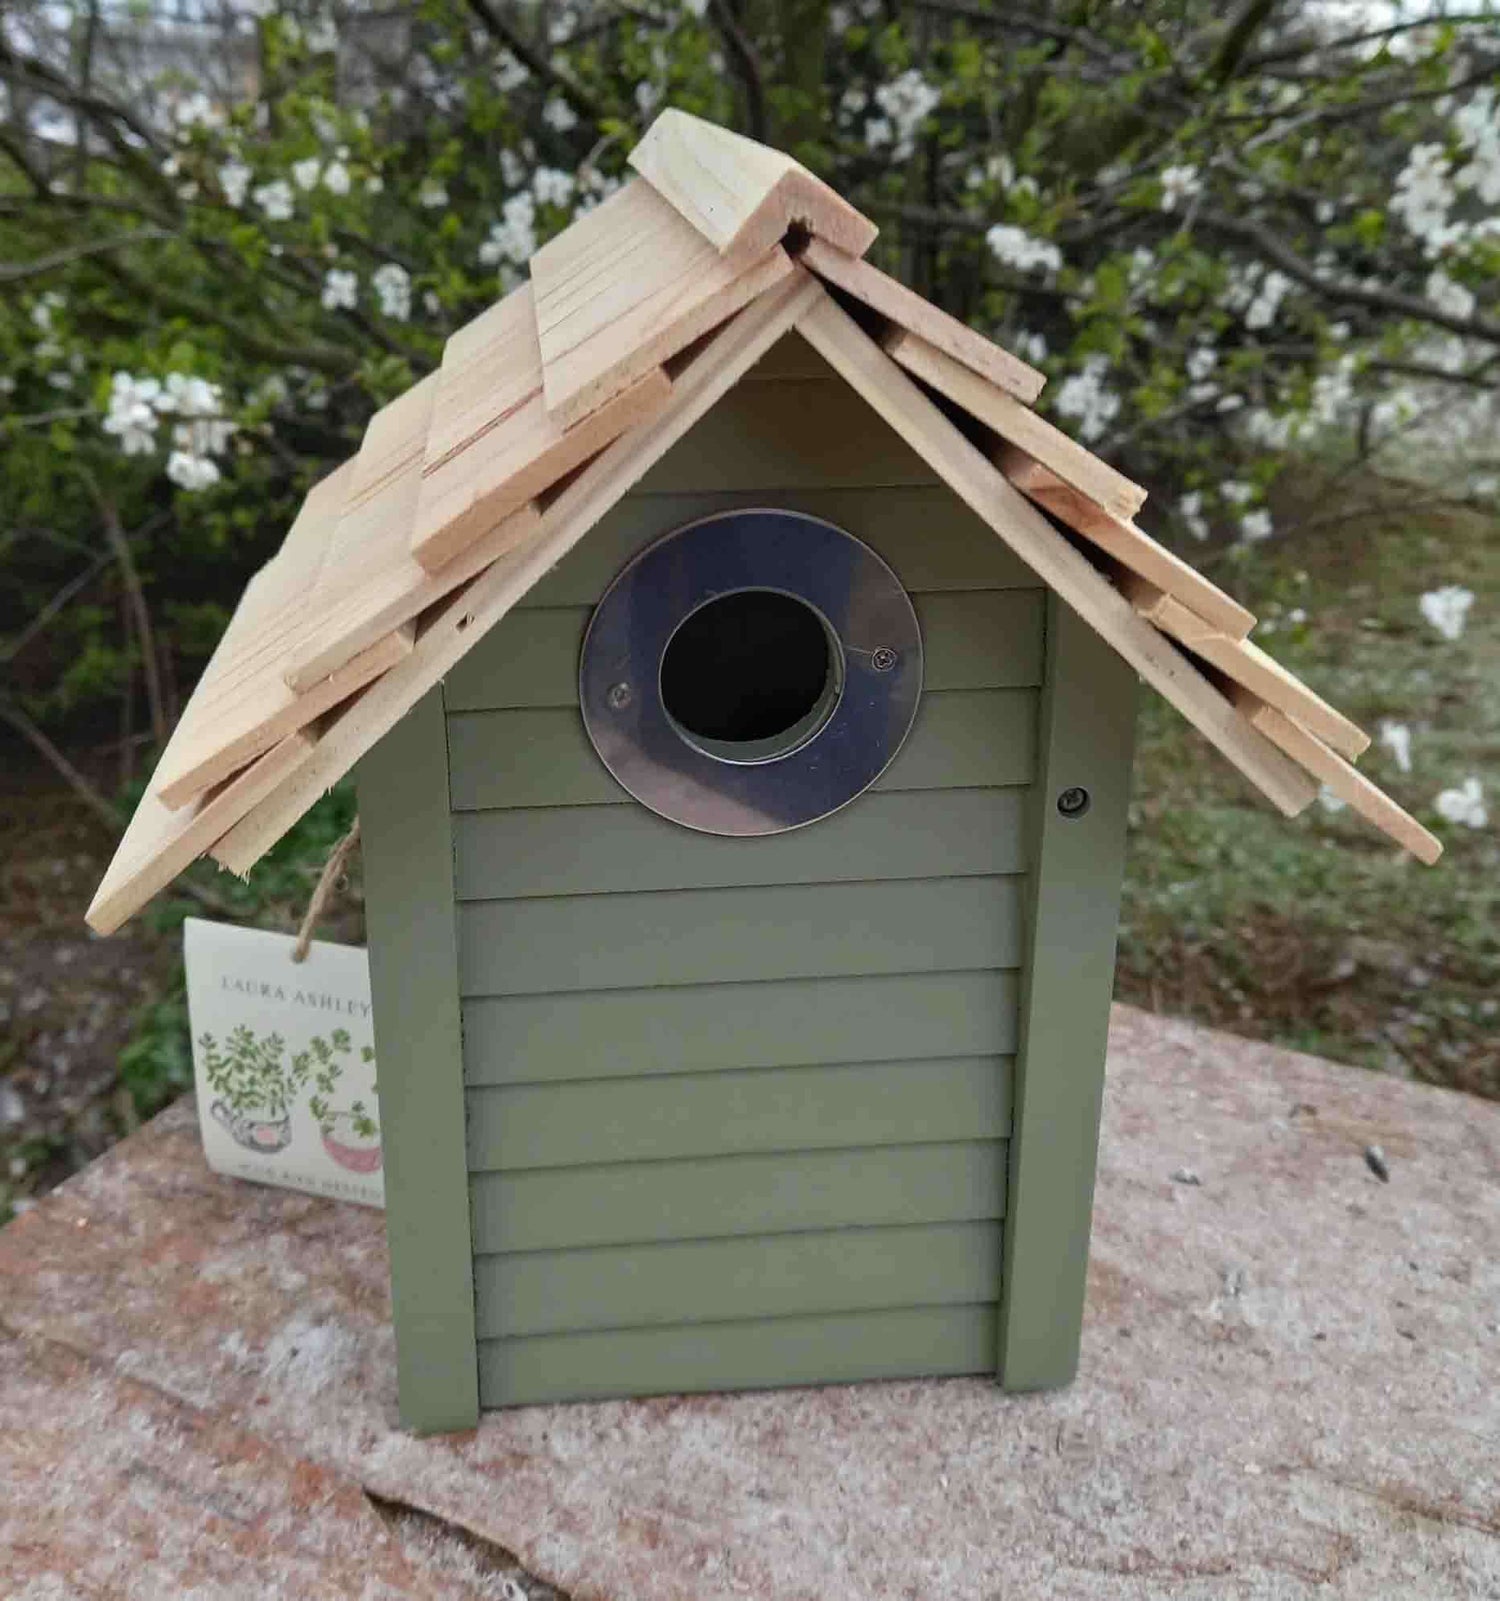 Gorgeous nest box with green body, silver entrance hole and wooden roof. 